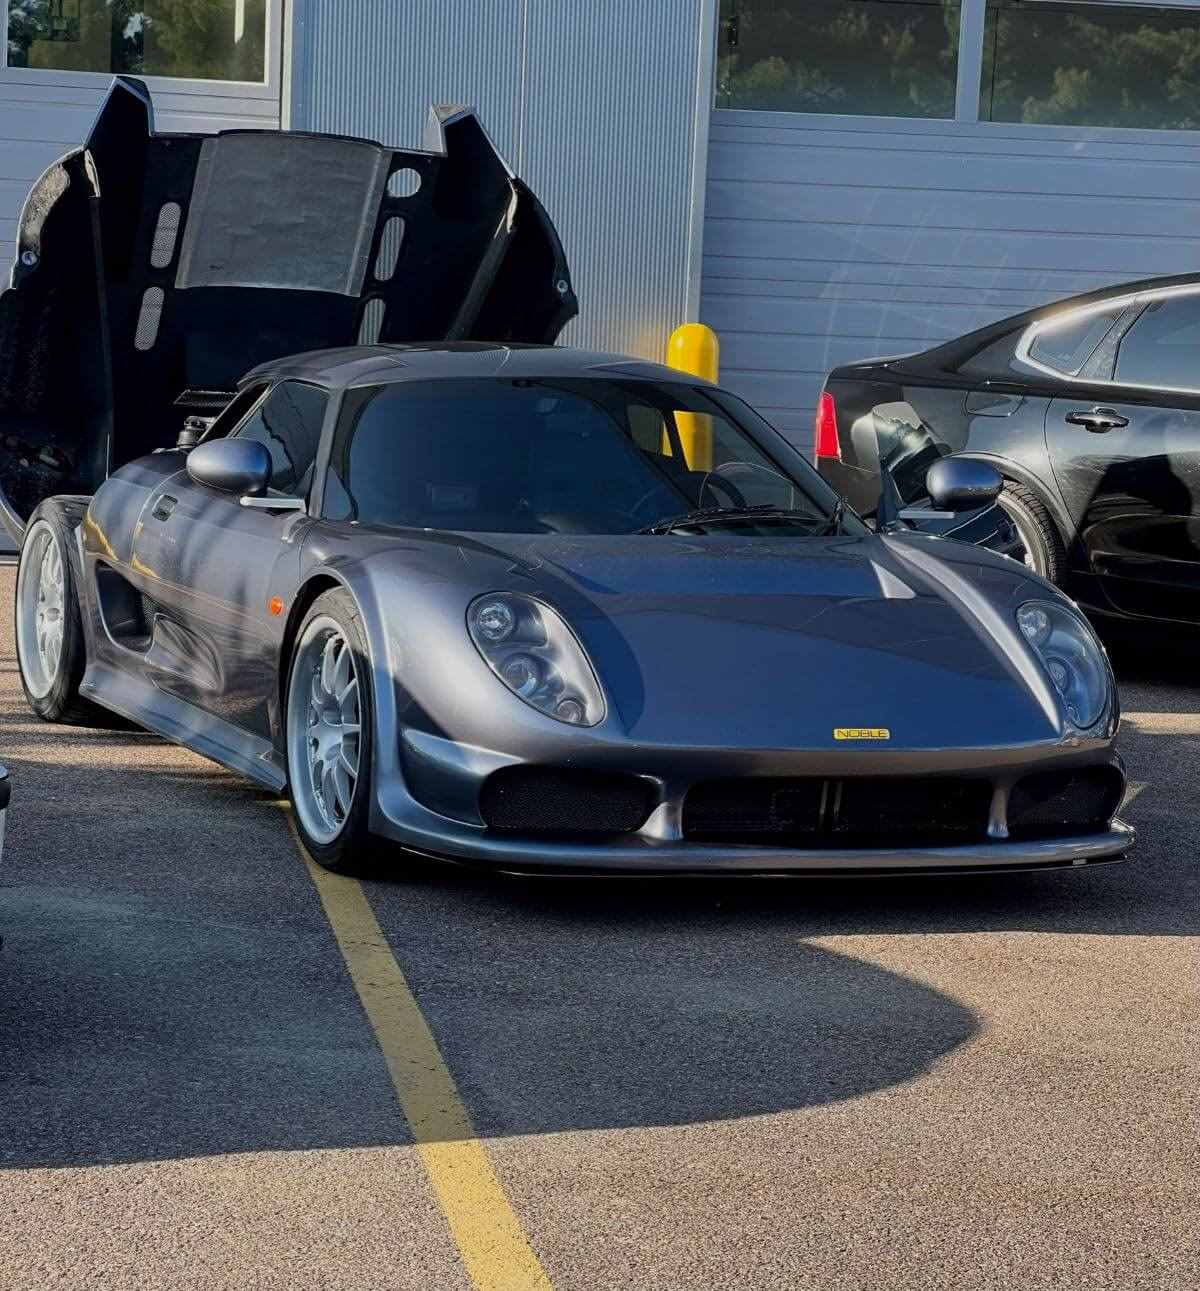 The Noble M12, a British built supercar with a Porsche-designed Ford engine